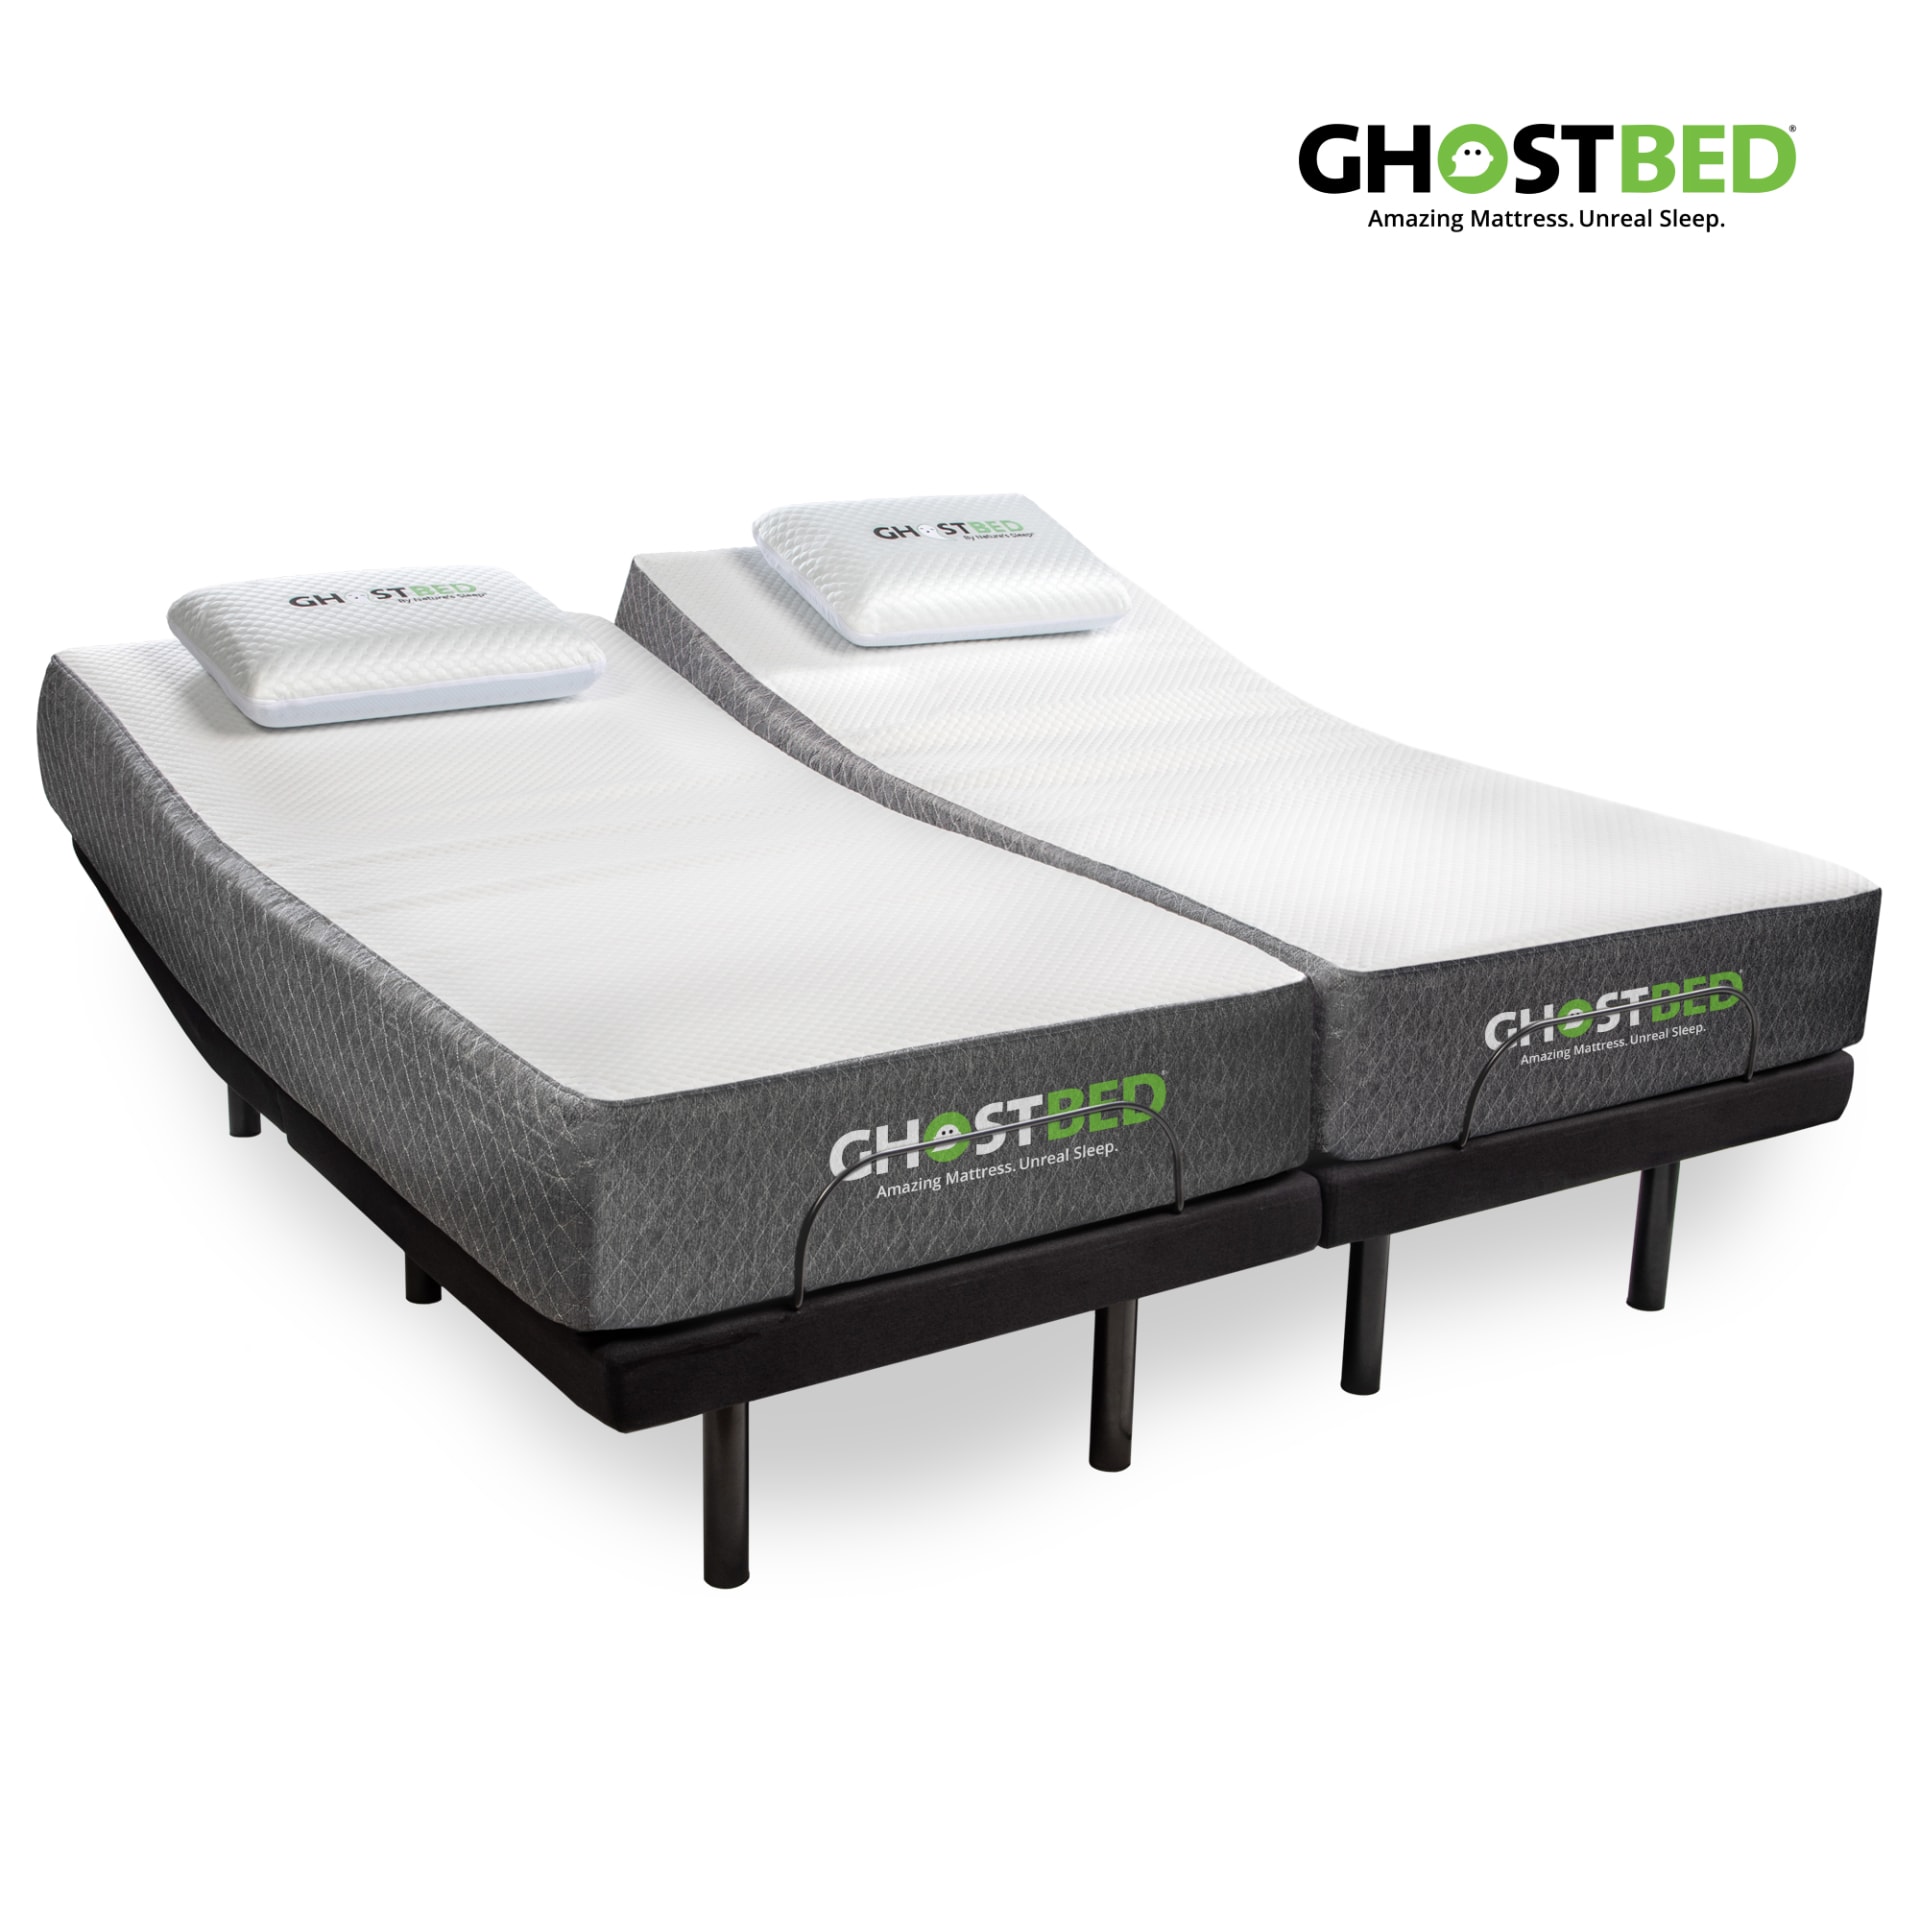 Ghostbed 11 Memory Foam Mattress With, King Size Bed Frame For Memory Foam Mattress